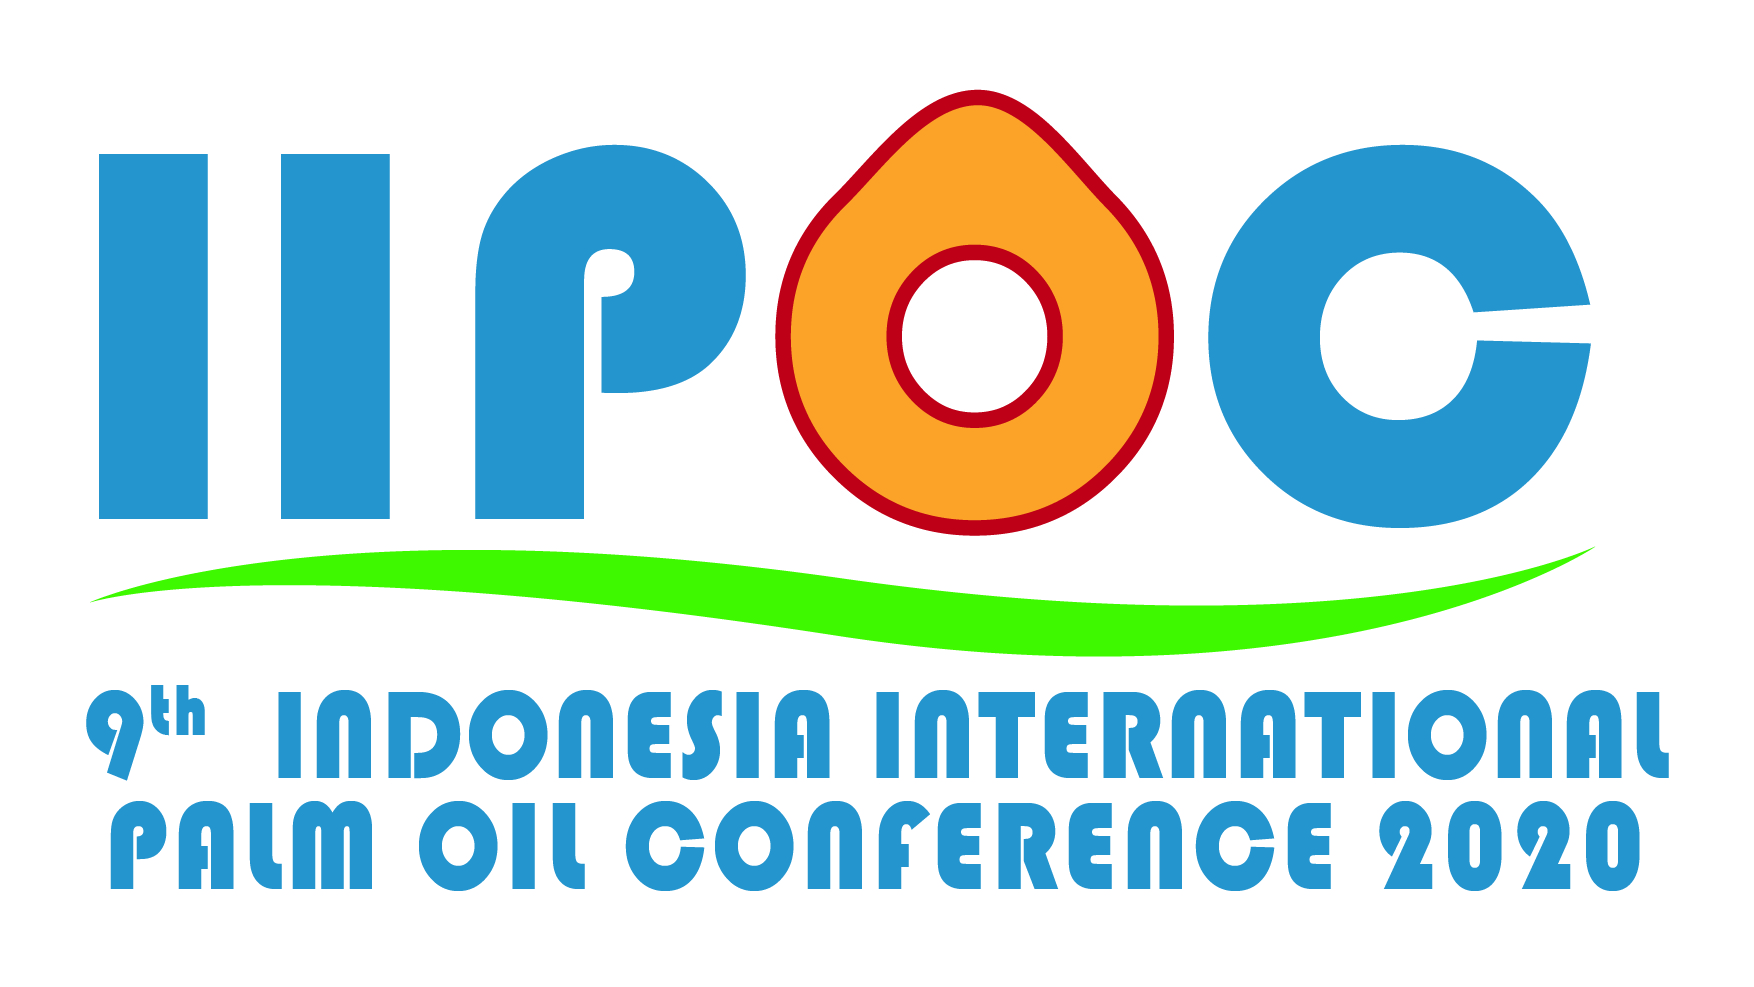 The 9th Edition of Indonesia International Palm Oil Conference 